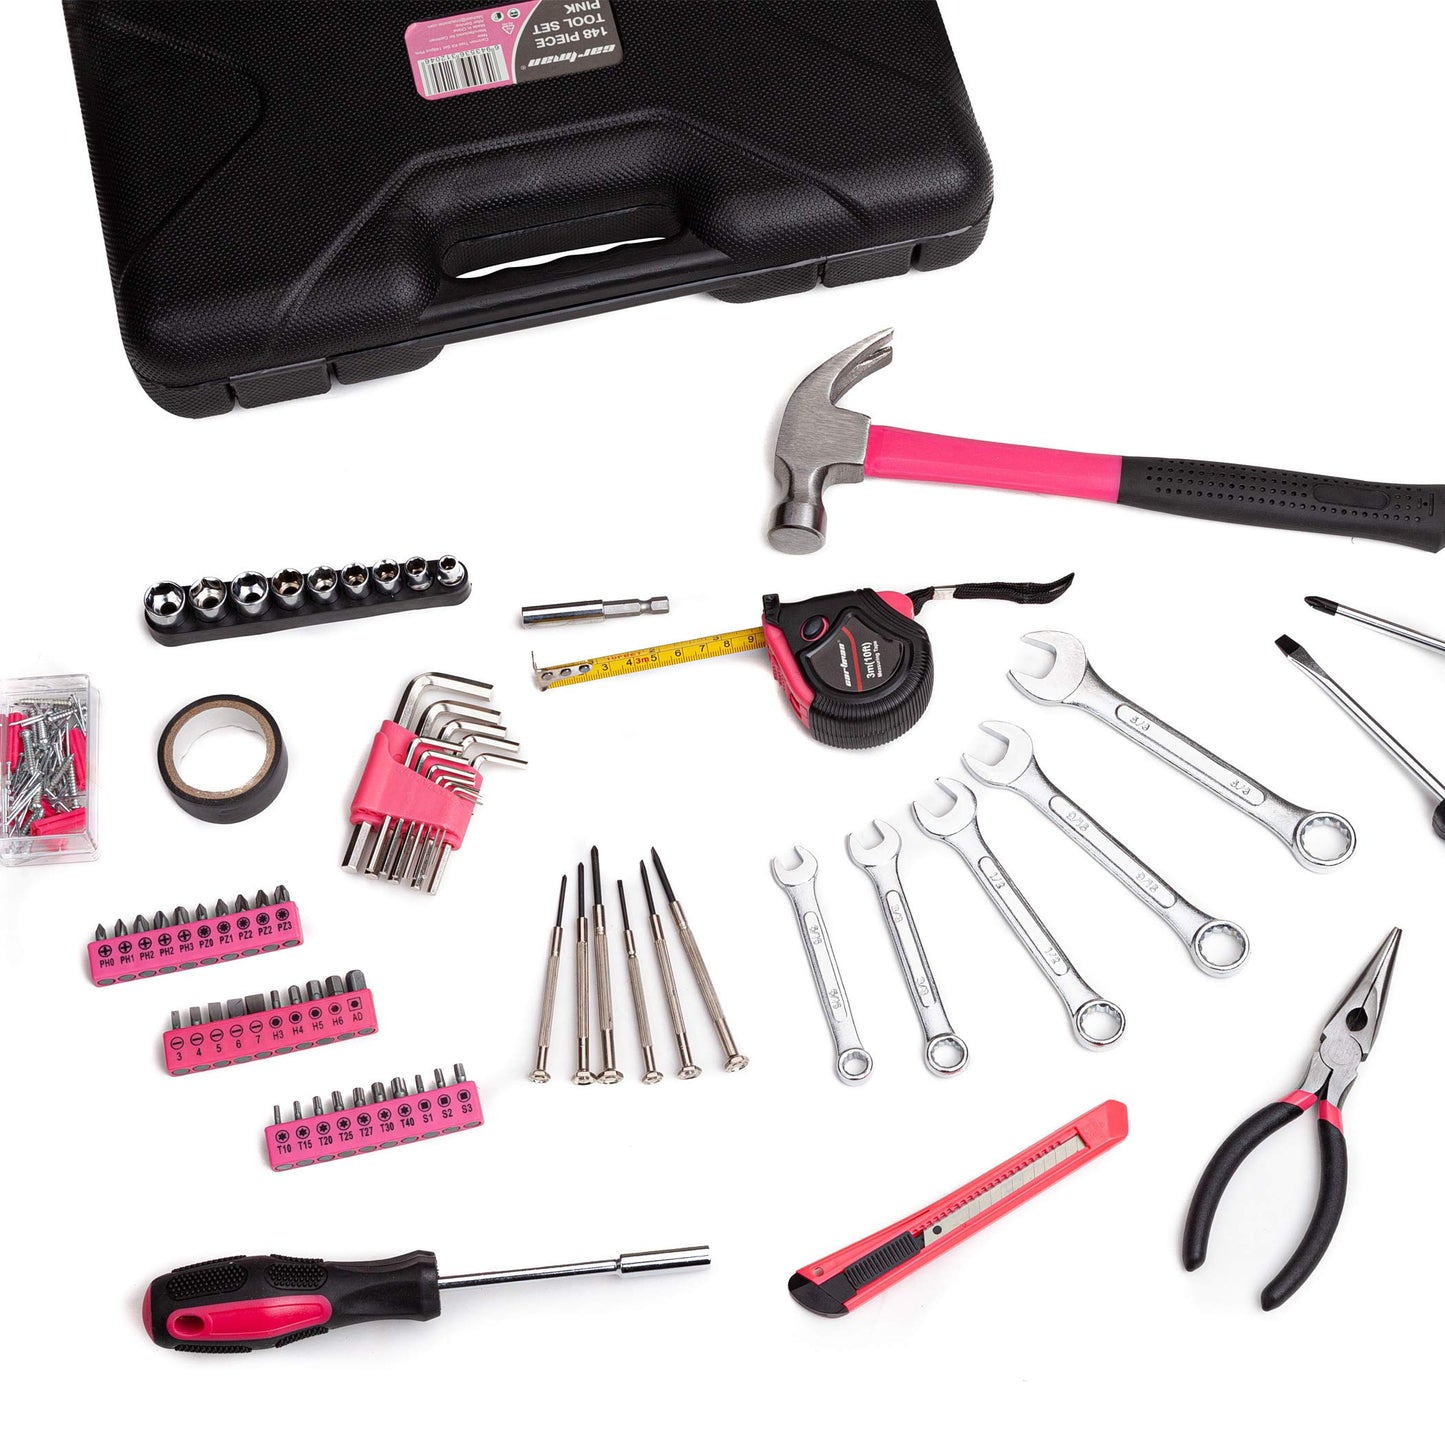 Cartman 148Piece Tool Set General Household Hand Tool Kit with Plastic Toolbox Storage Case Pink